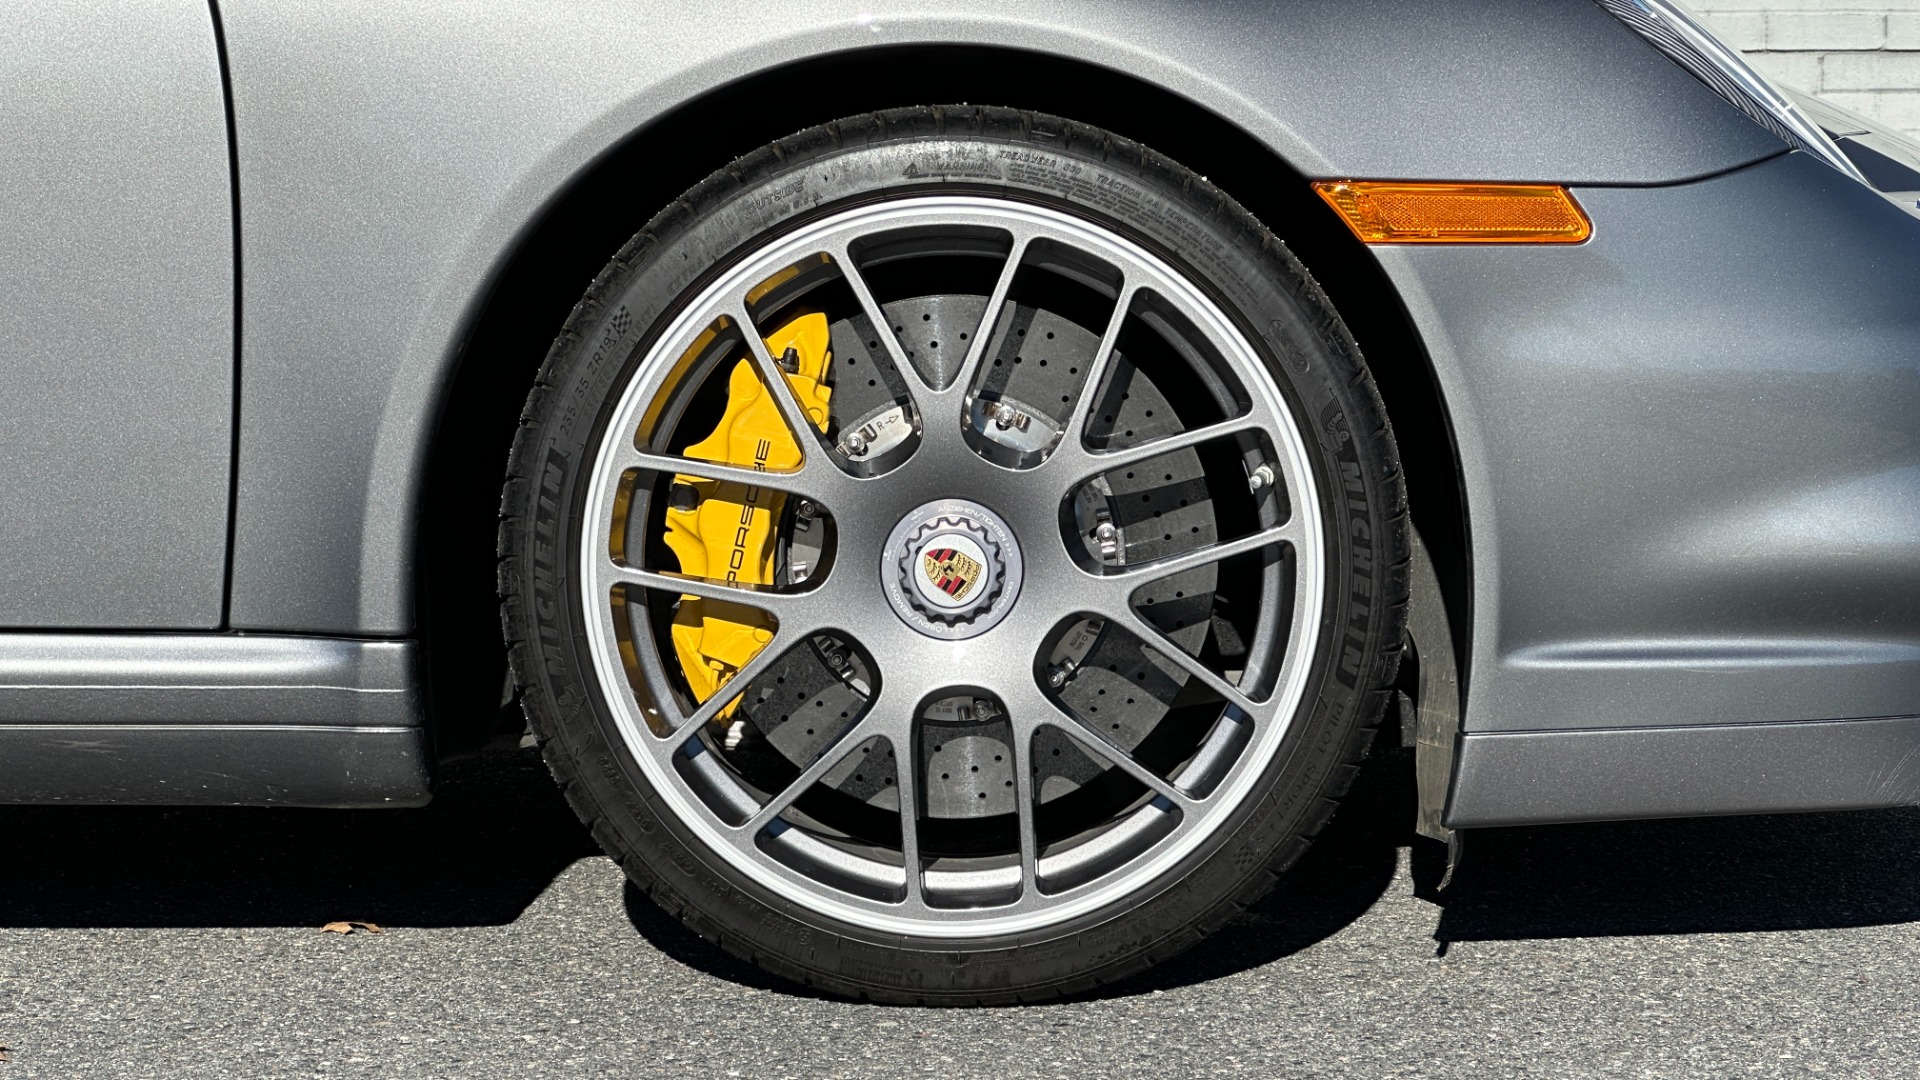 Used 2012 Porsche 911 TURBO S / CENTER LOCK WHEELS / FULL LEATHER INTERIOR / YELLOW CALIPERS / PA for sale $138,999 at Formula Imports in Charlotte NC 28227 45